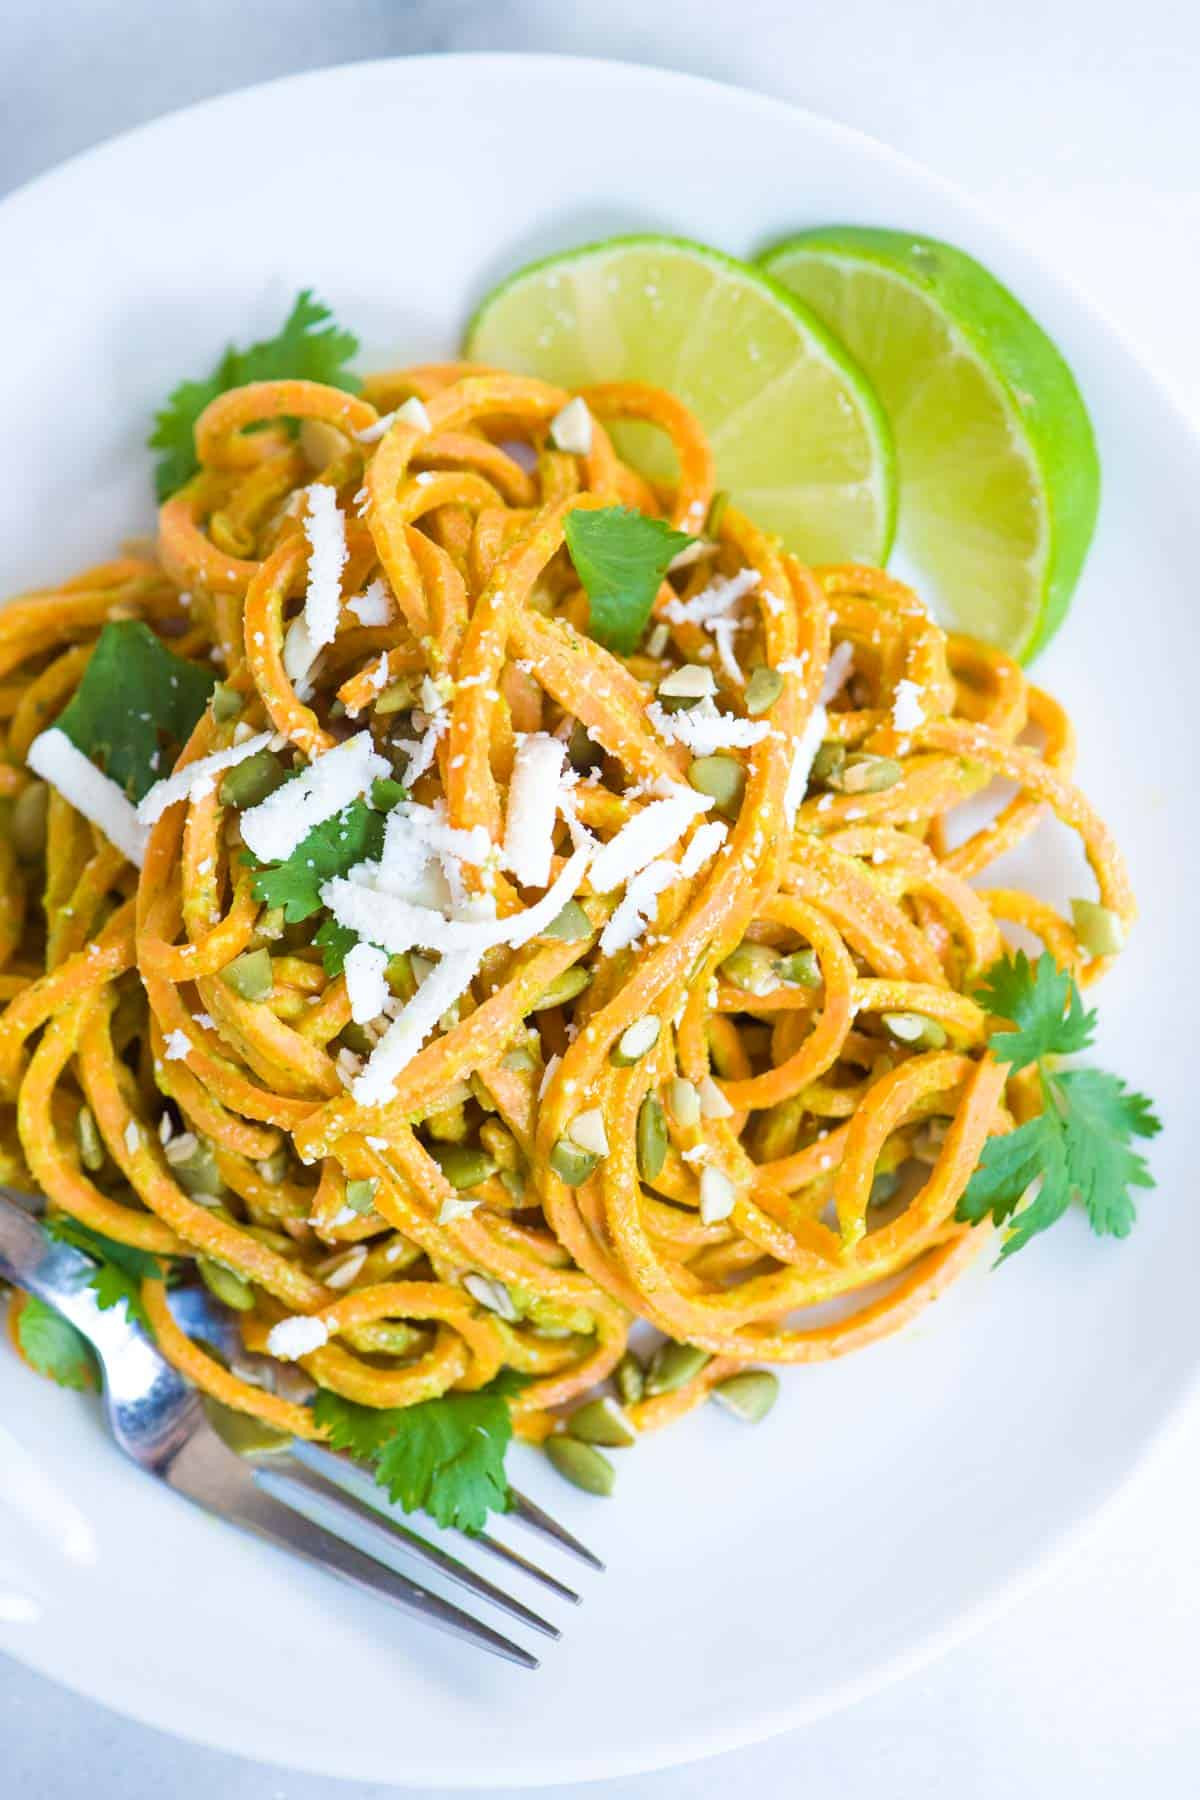 How To Cook Sweet Potato Noodles
 Creamy Avocado Lime Sweet Potato Noodles